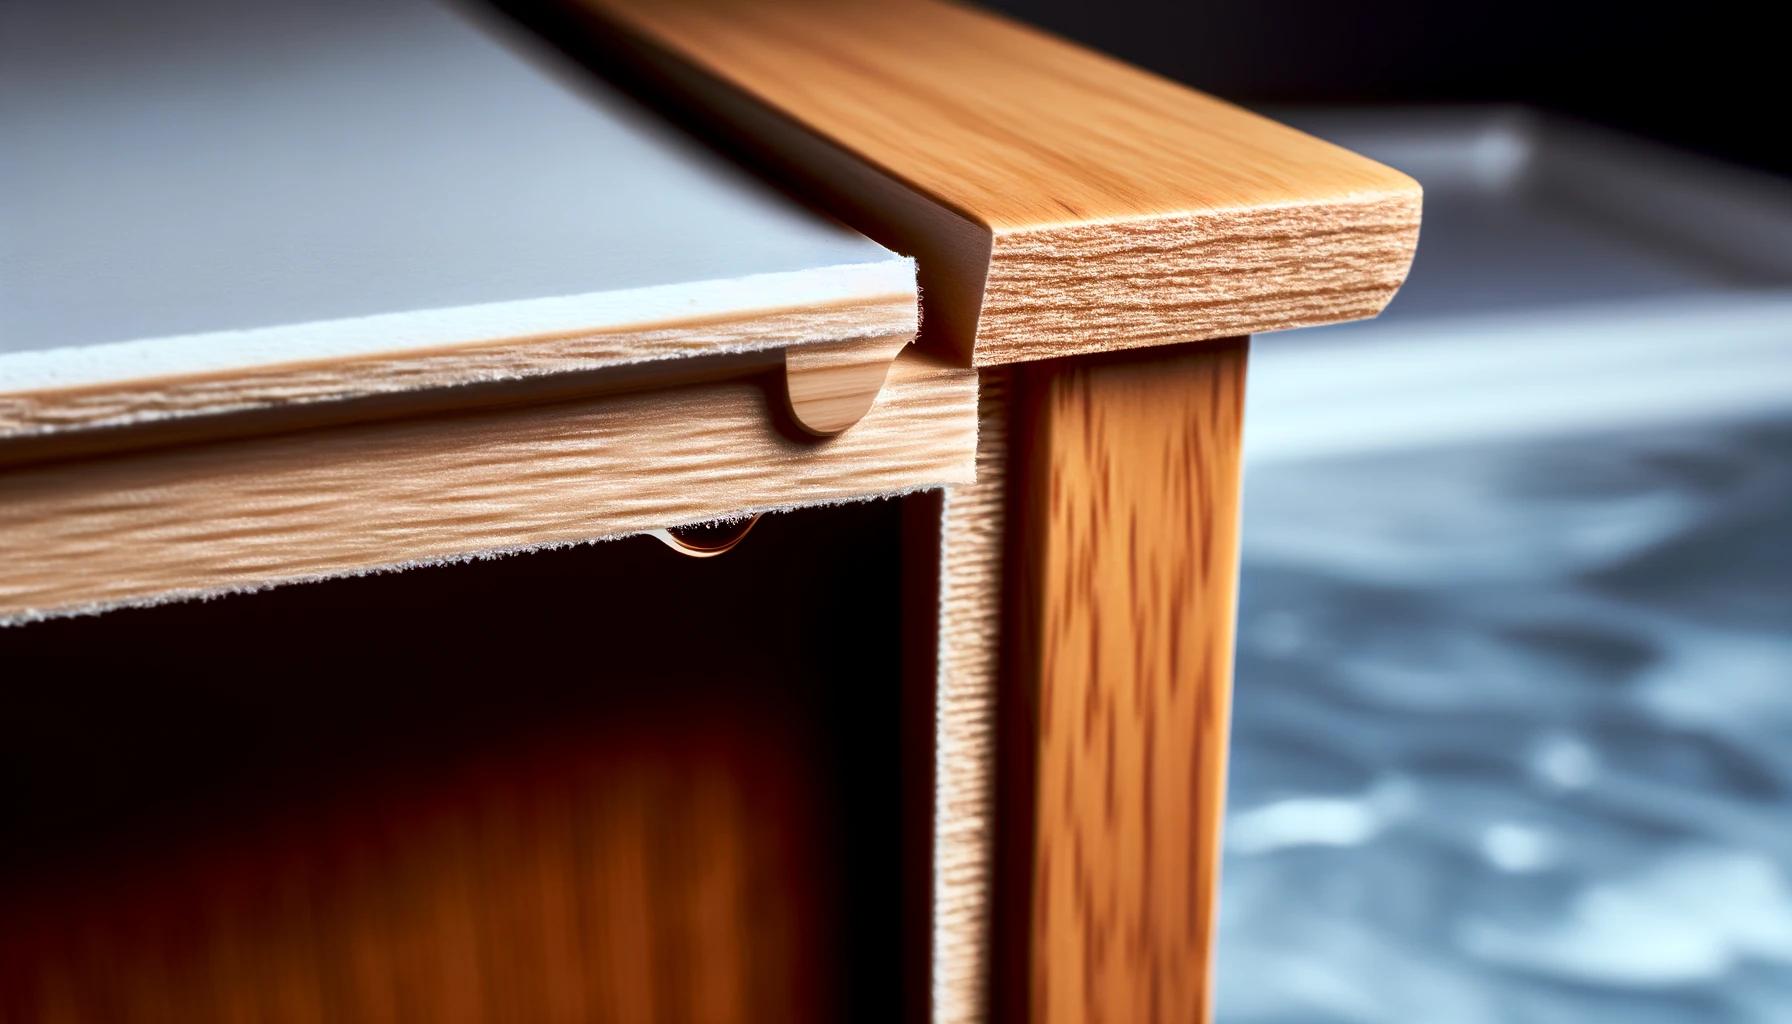 Importance of edge banding in woodworking